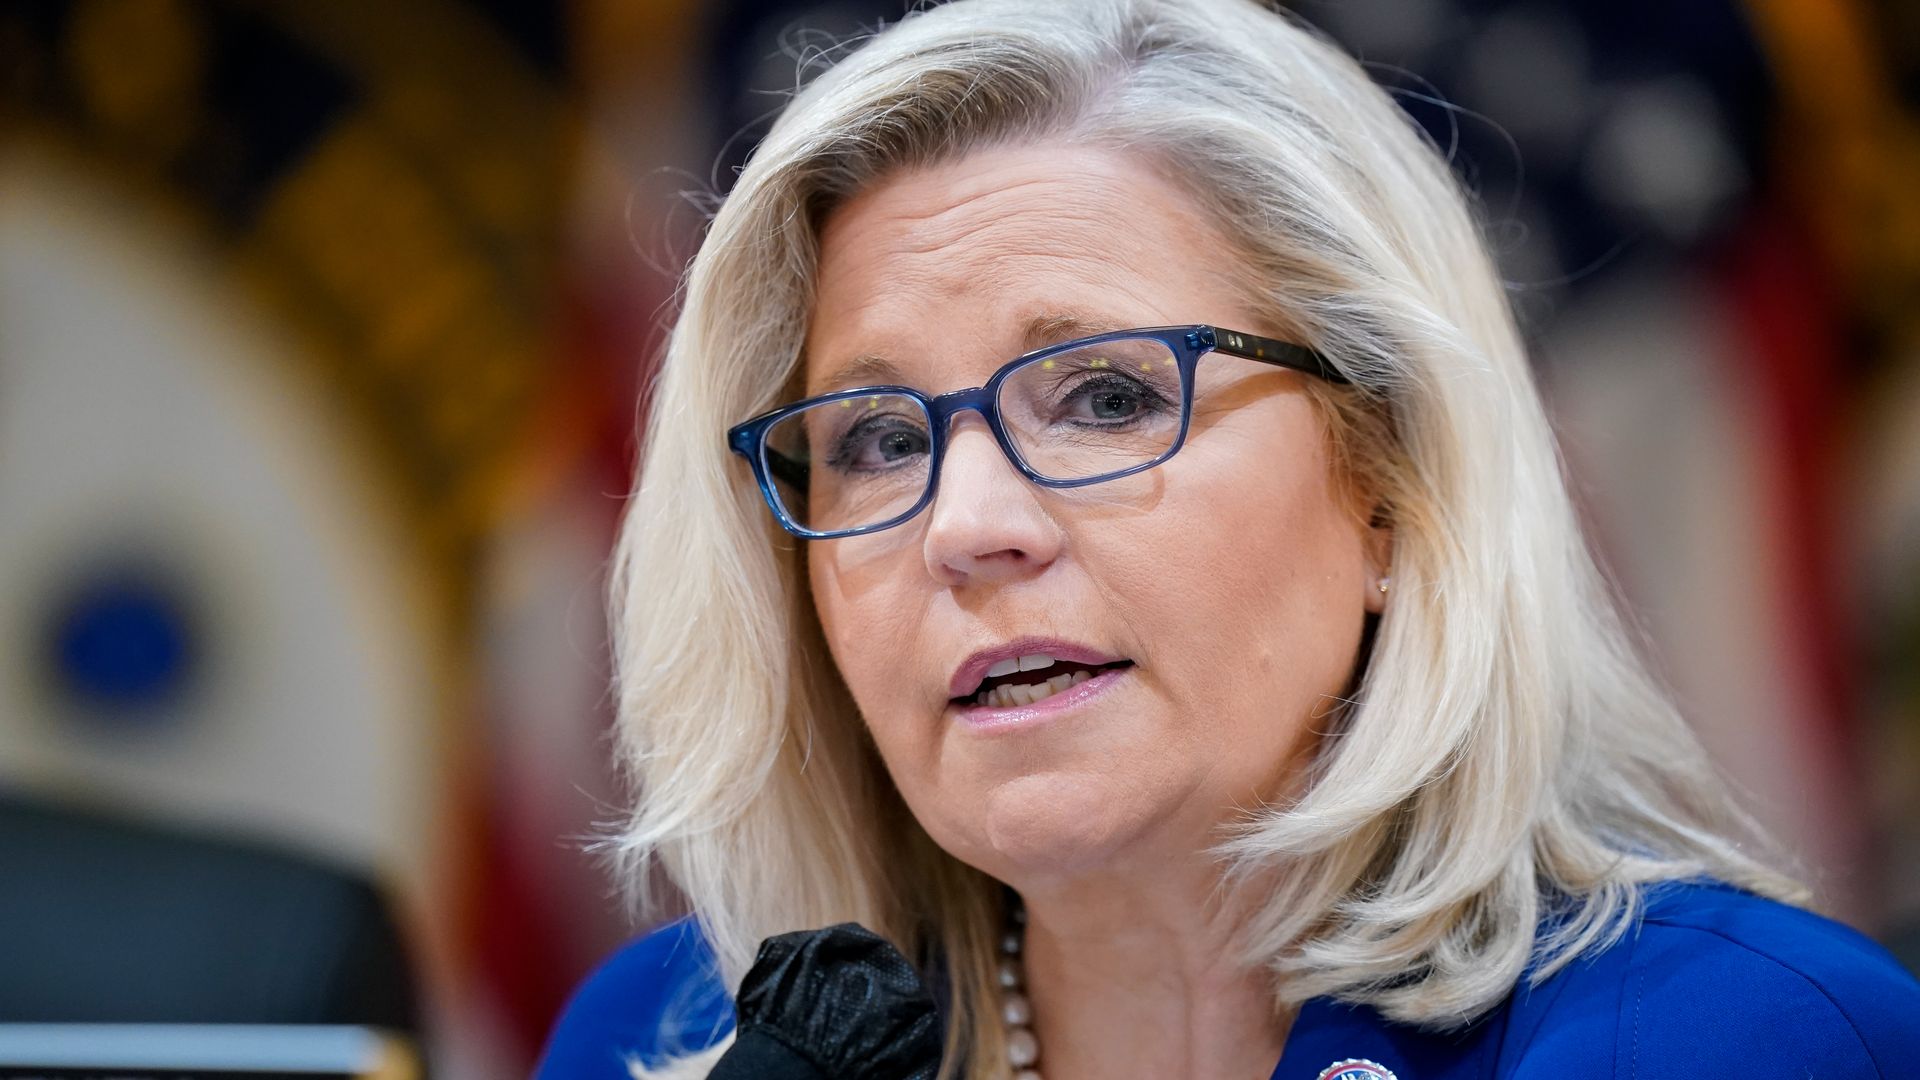 Rep. Liz Cheney (R-Wyo.) speaking during a Jan. 6 select committee hearing in the Capitol on June 21.